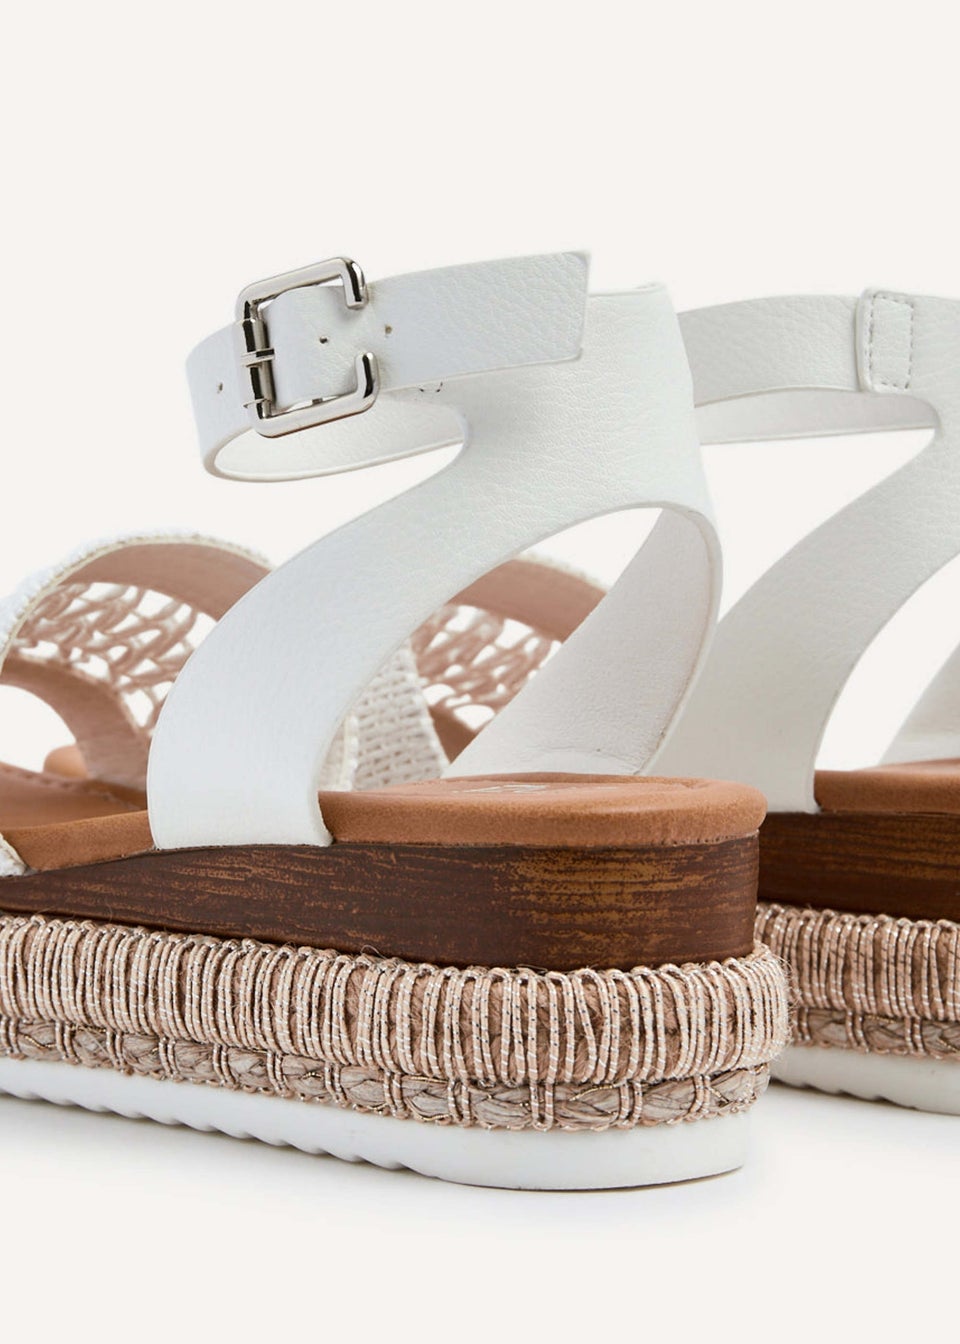 Linzi Evie White Faux Leather Cut Out Woven Espadrille Inspired Platform Wedge